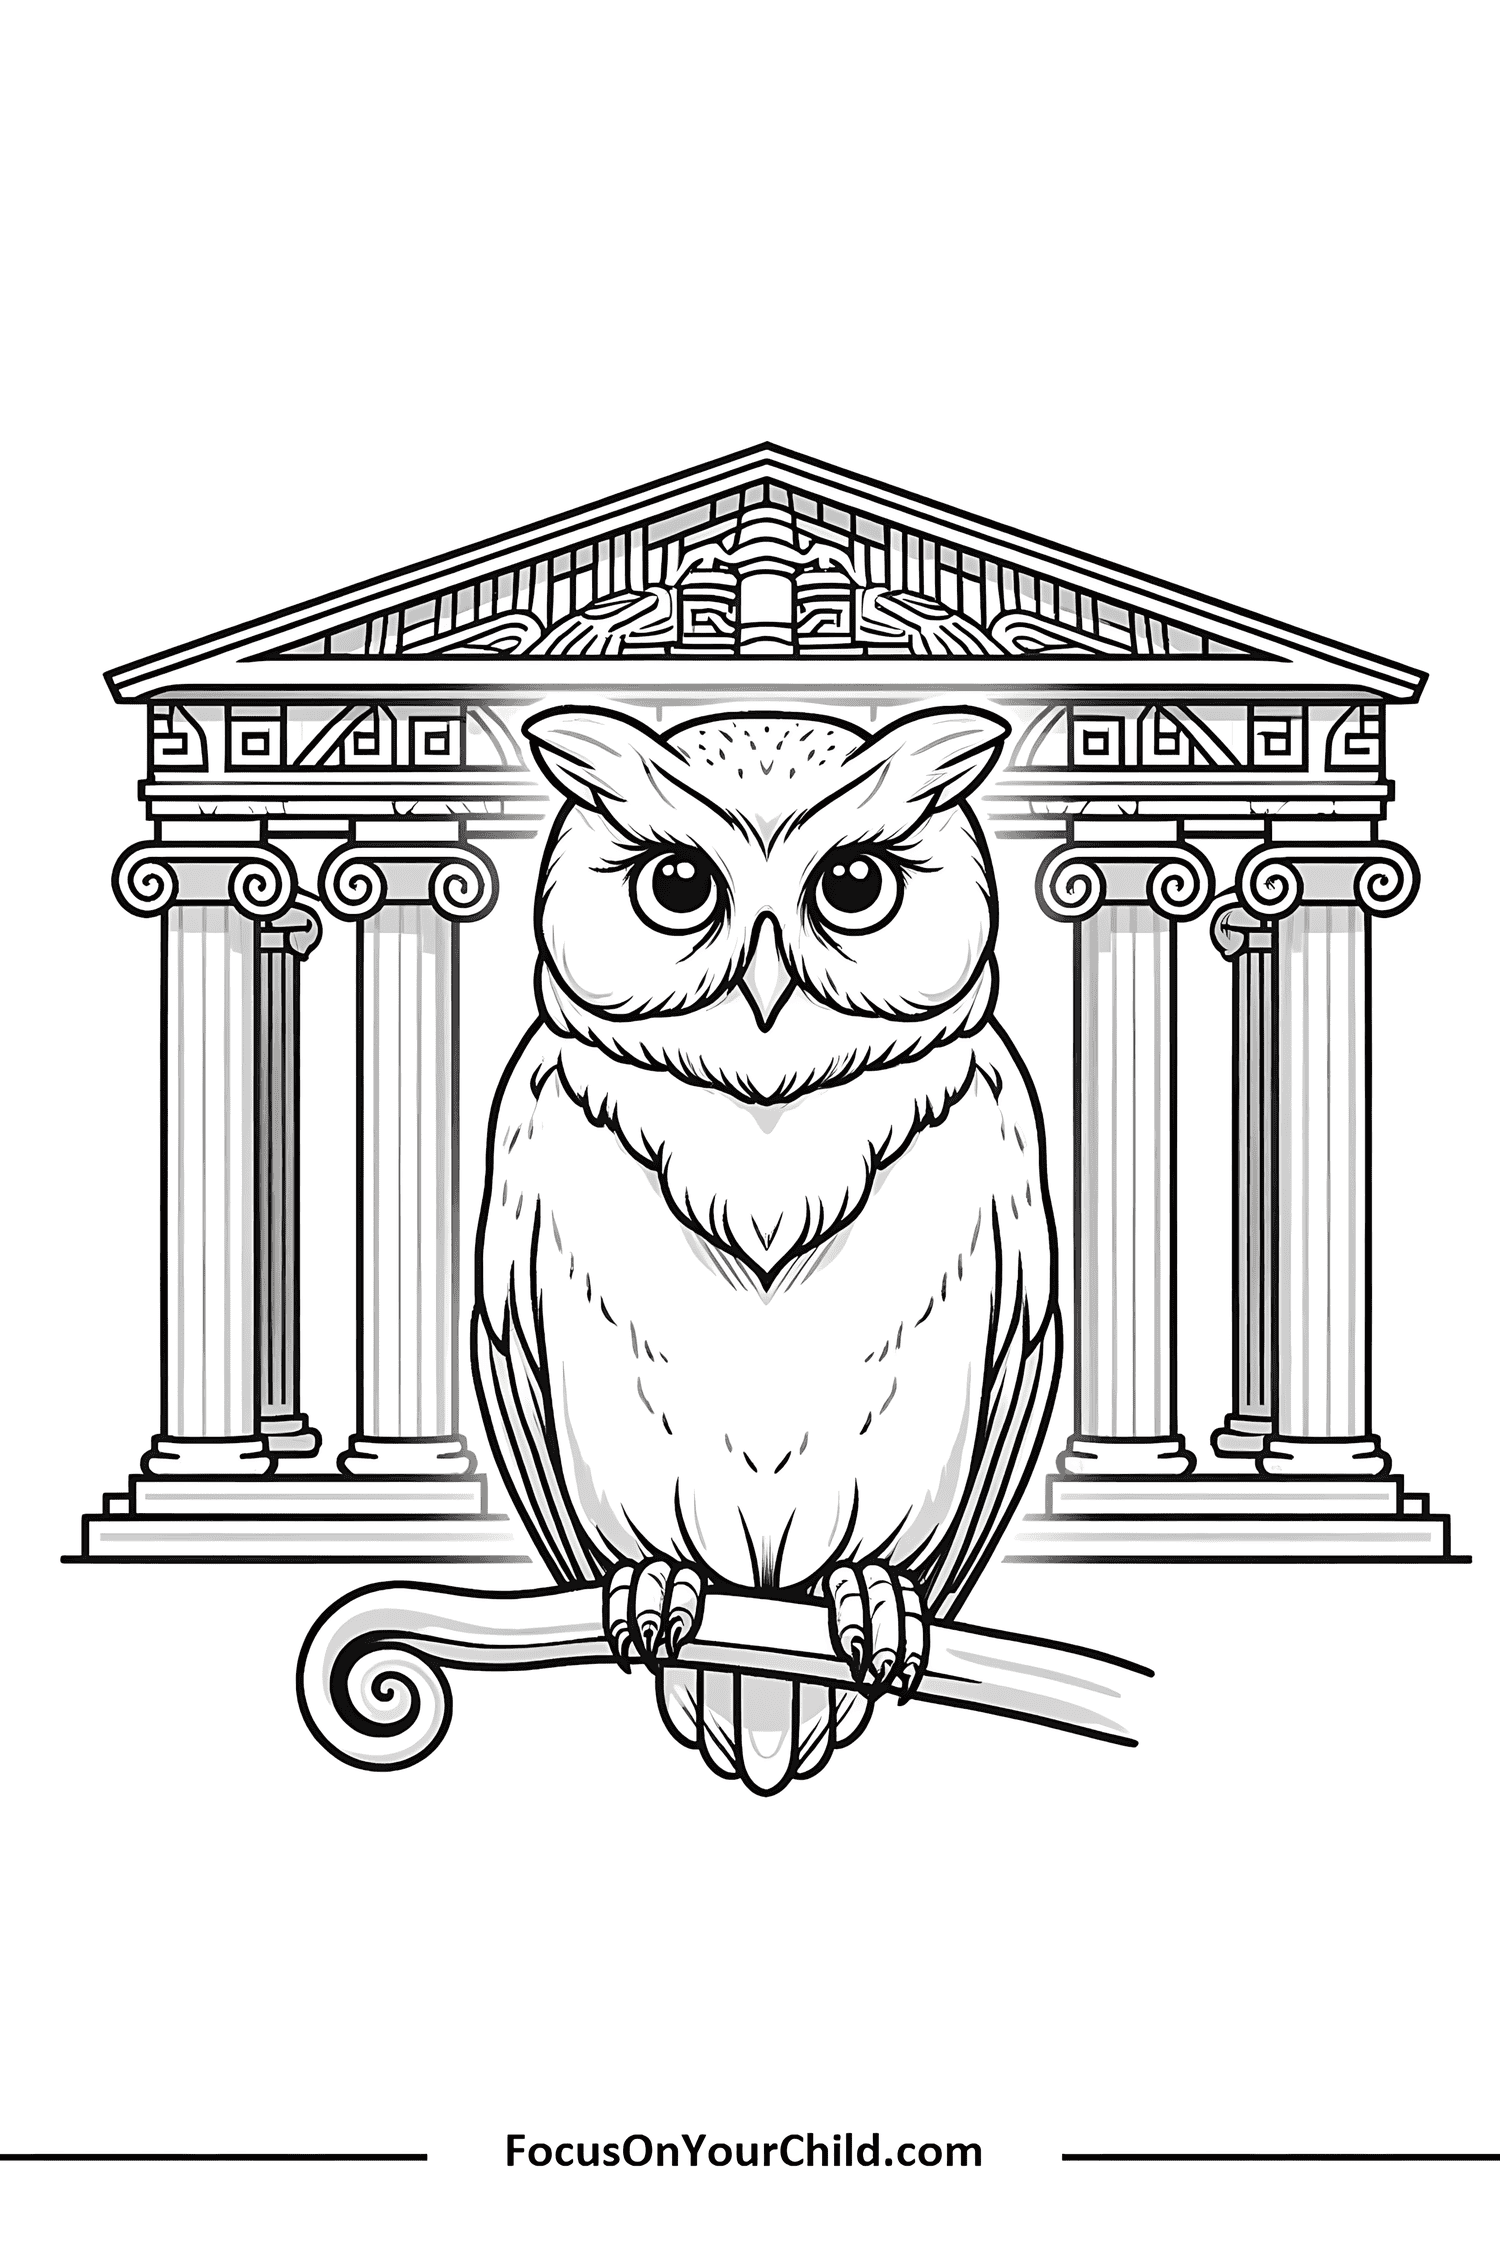 Owl on branch with Greek temple background.